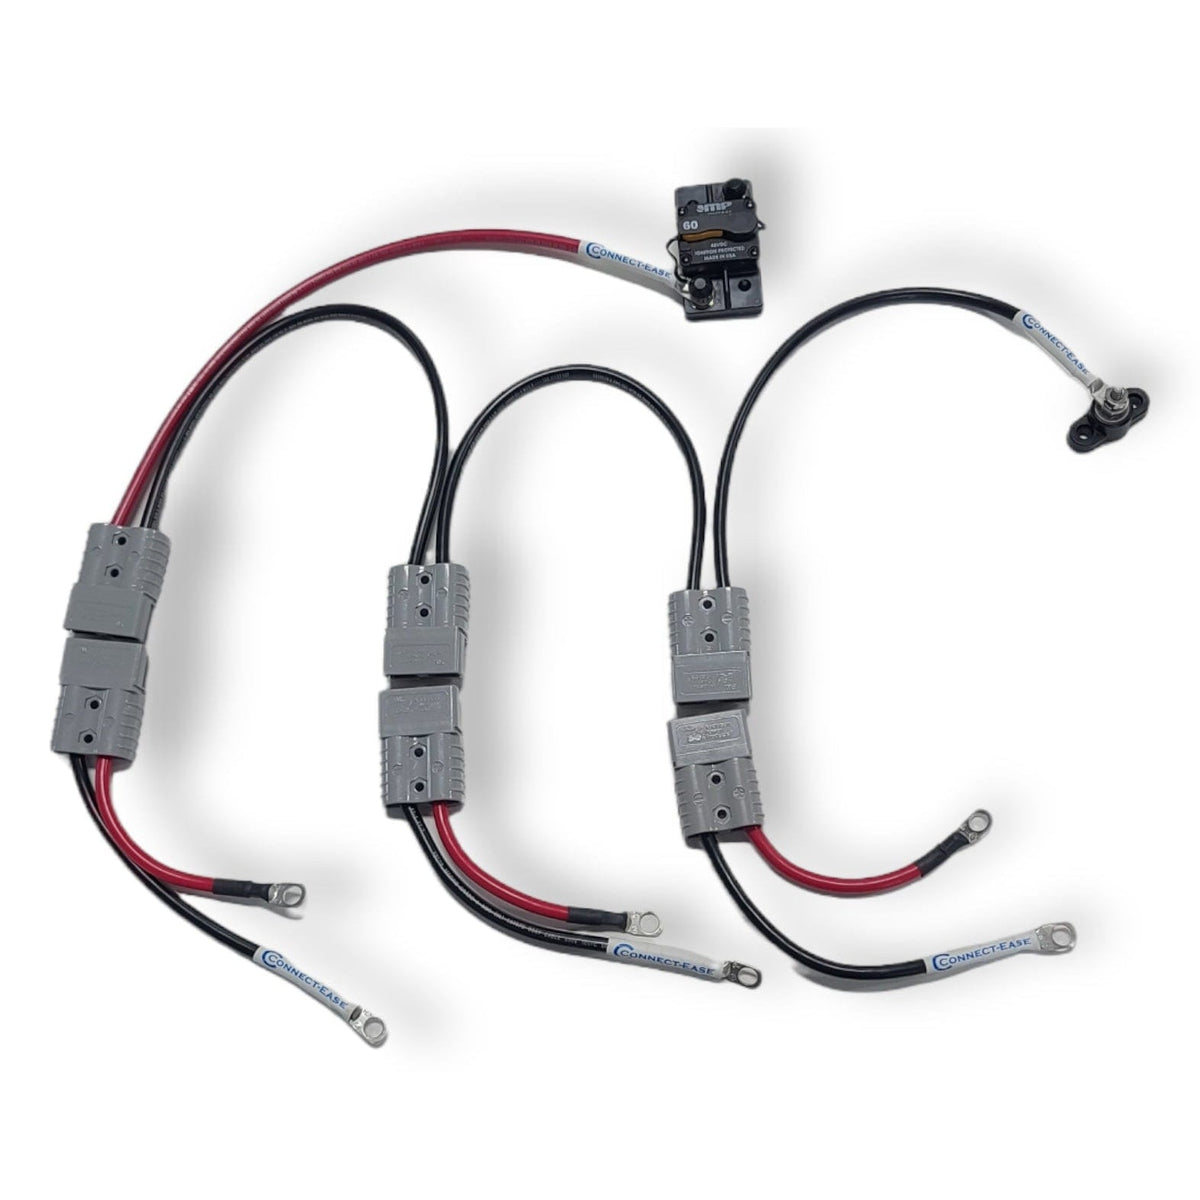 Connect-Ease Qualifies for Free Shipping Connect-Ease 36v Series Heavy Duty Kit 6 AWG #RCE36VBHDK